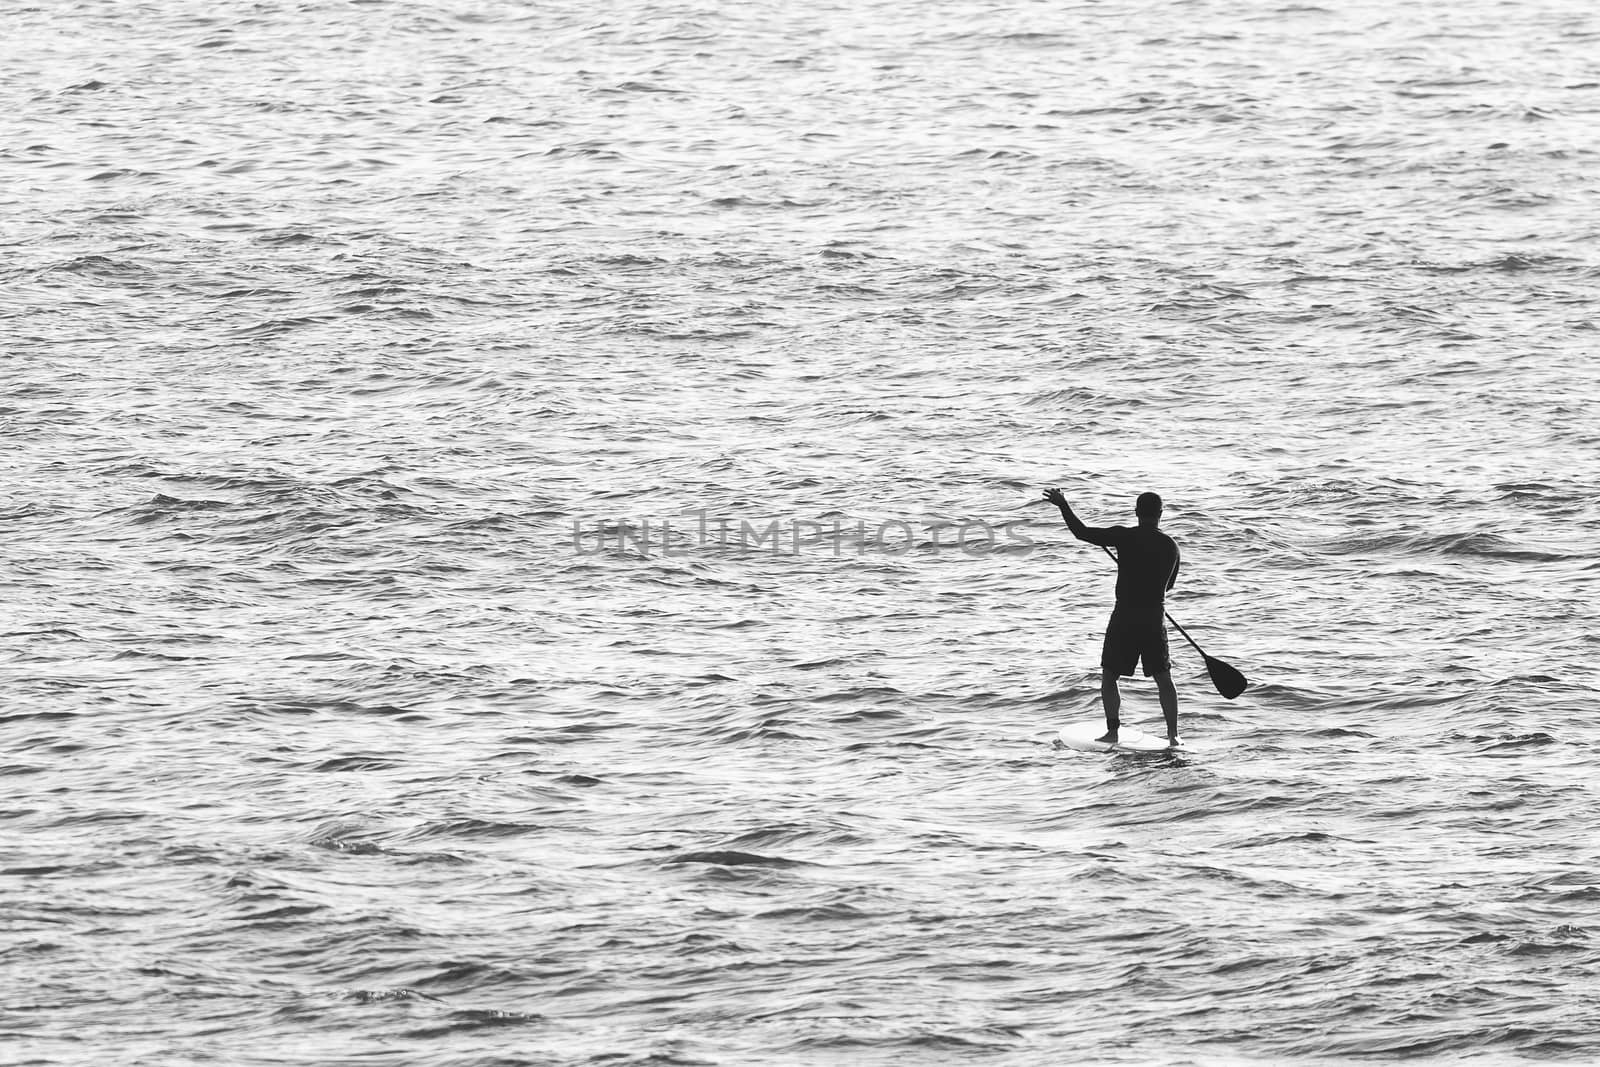 Black and White photo of man on Stand Up Paddle Board surrounded my sea water.